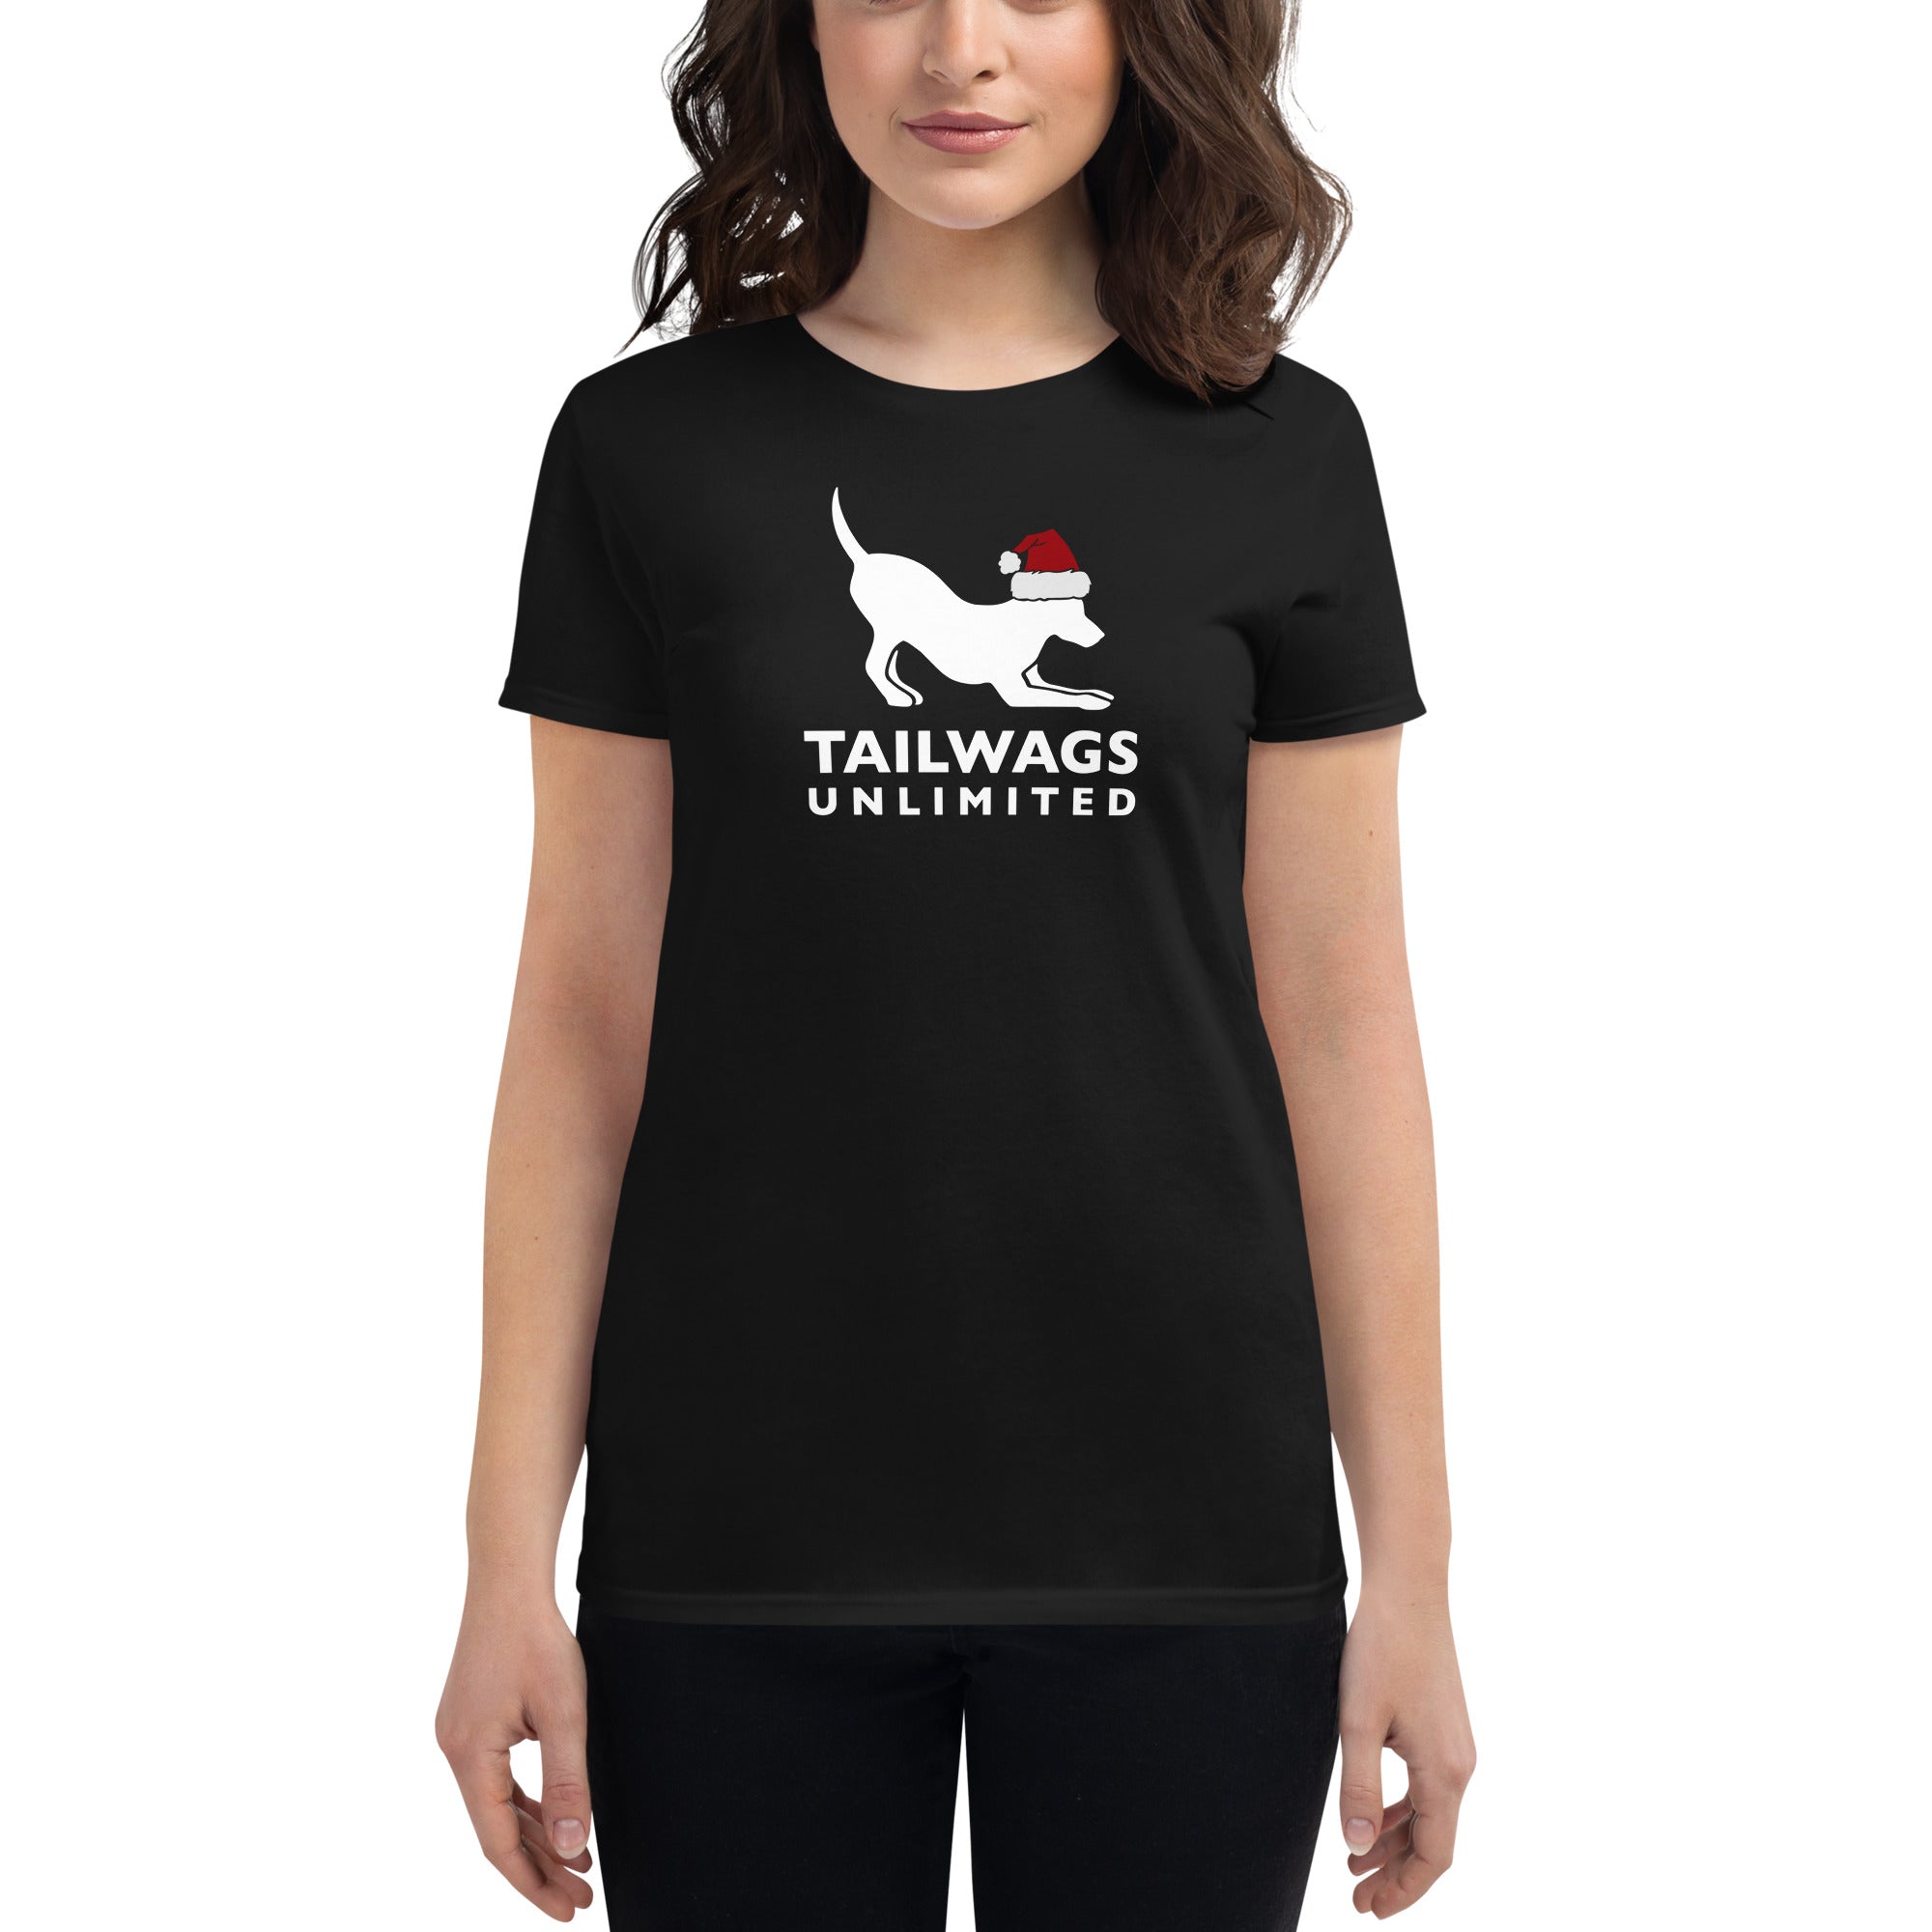 Red Santa Hat Logo Women's Fit T-Shirt - TAILWAGS UNLIMITED